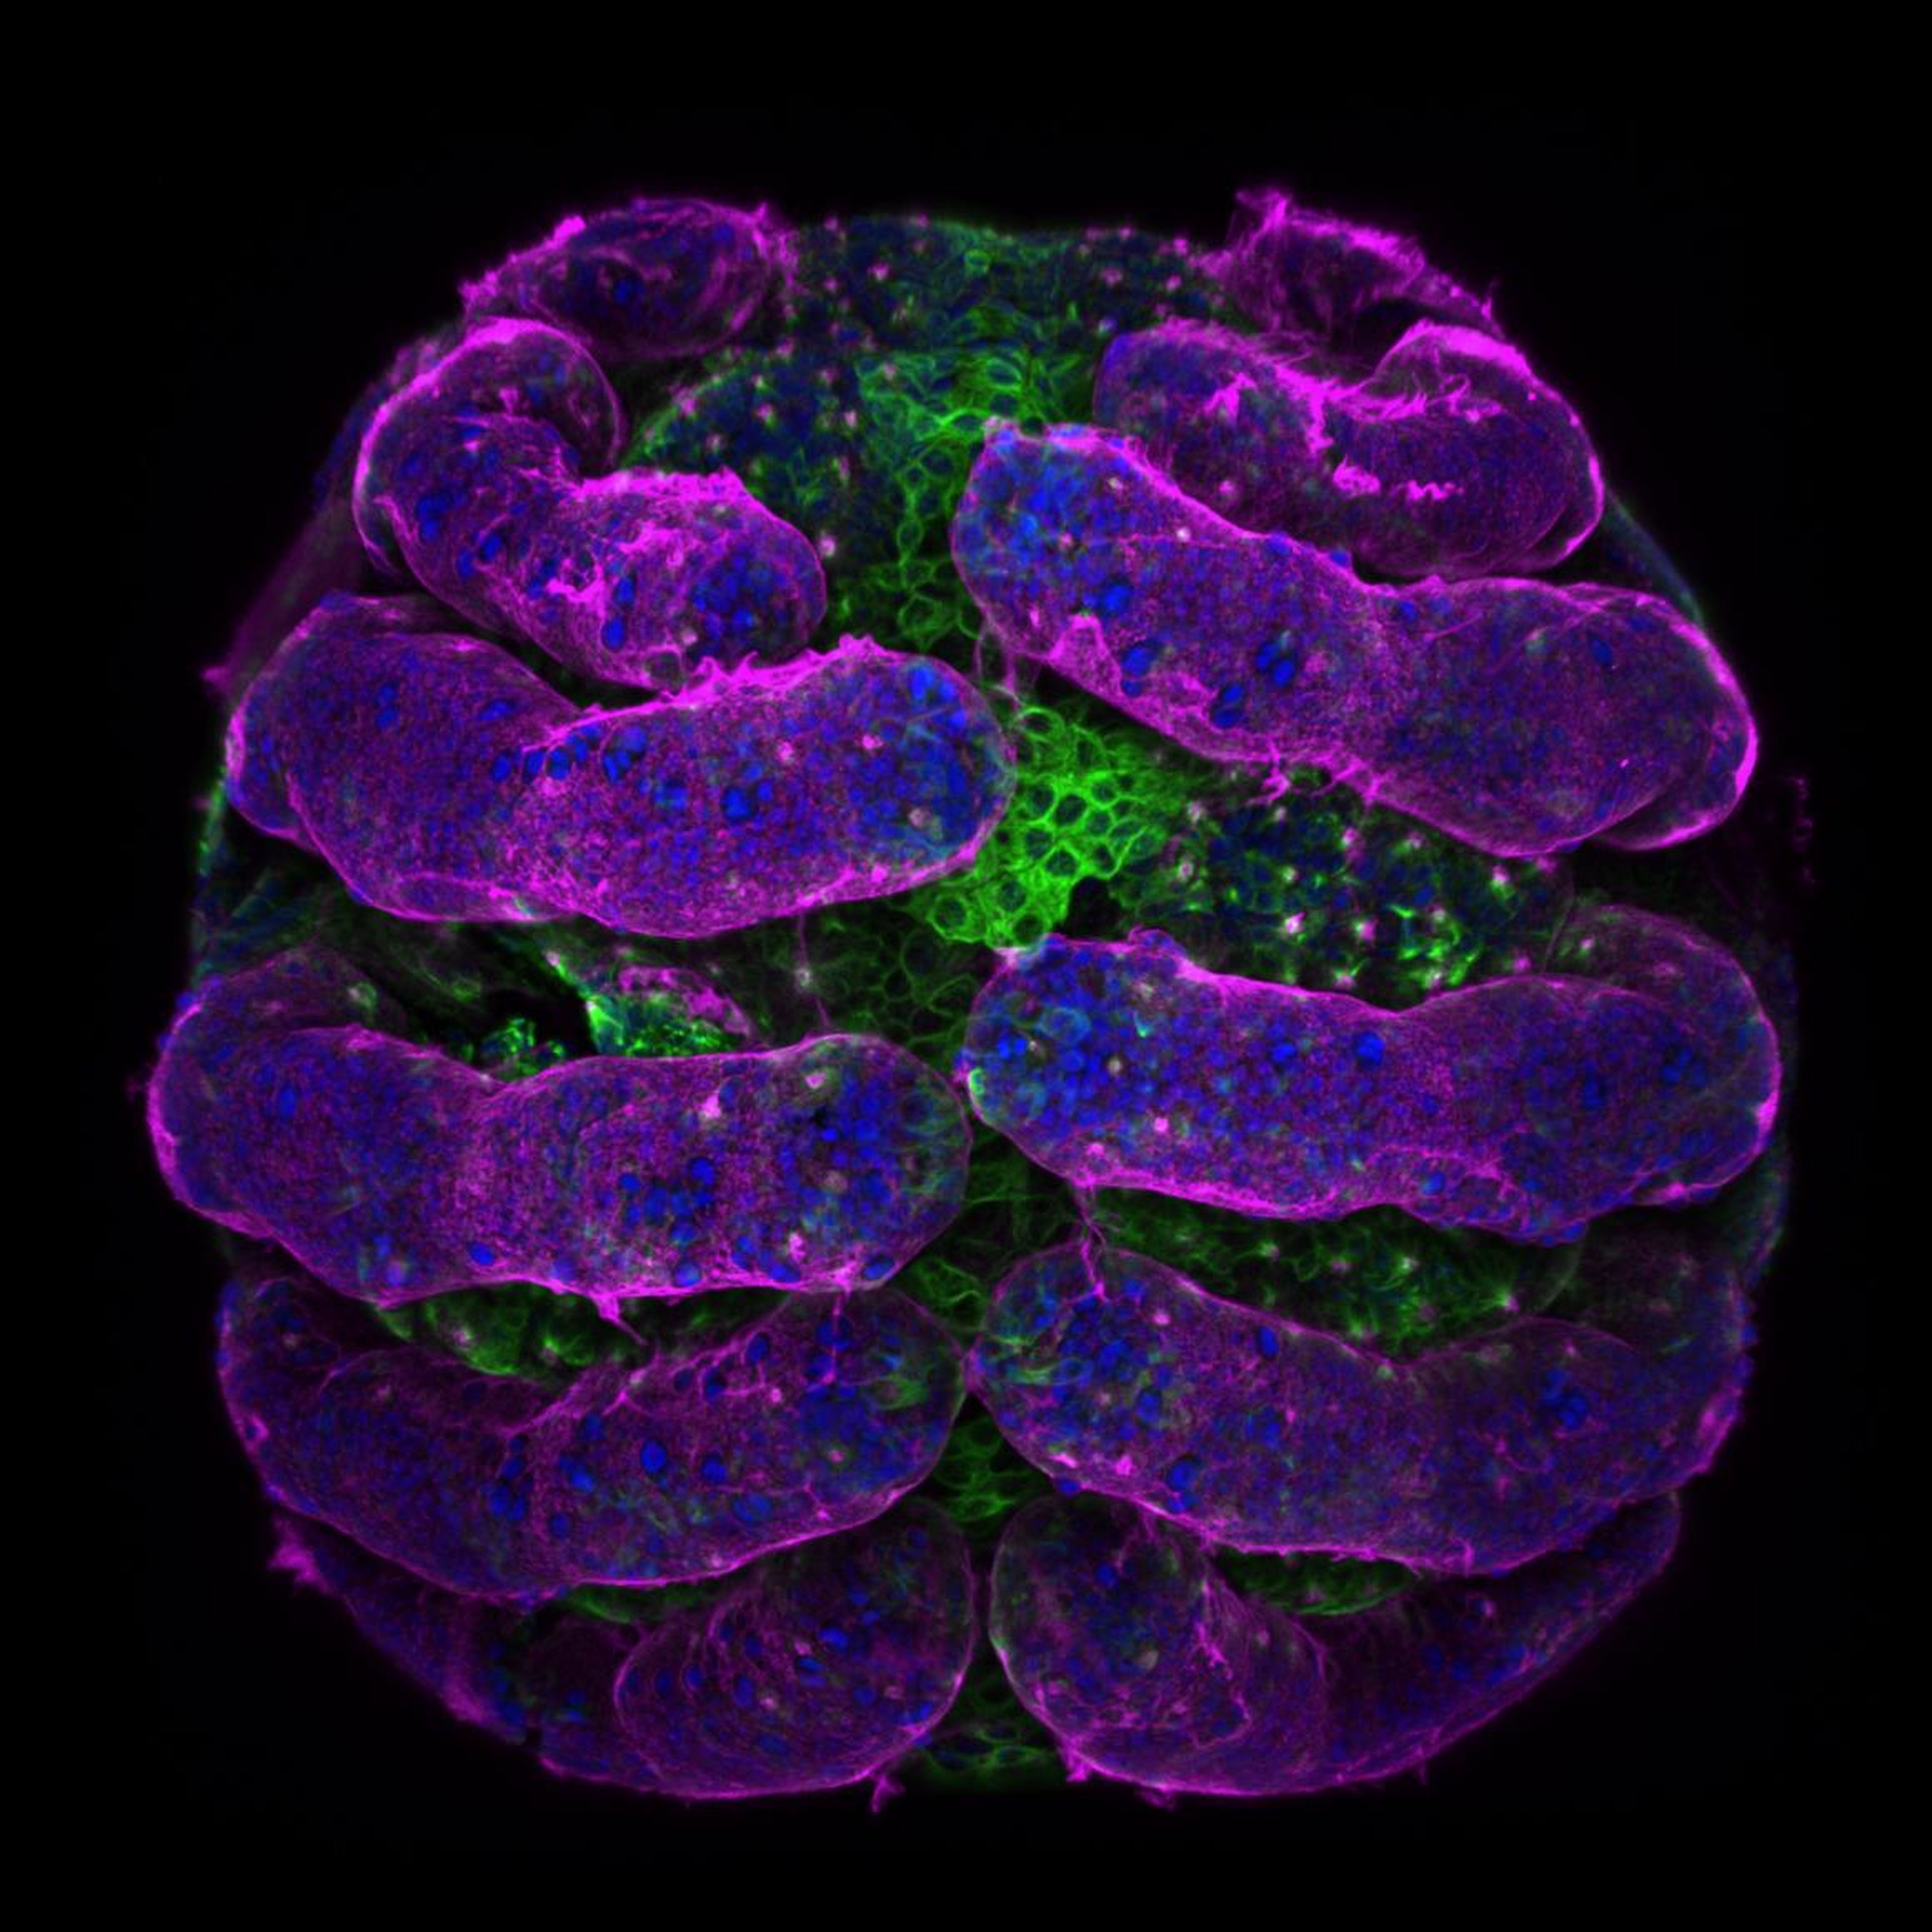 No. 5: A spider embryo with its surface in pink and microtubules in green.